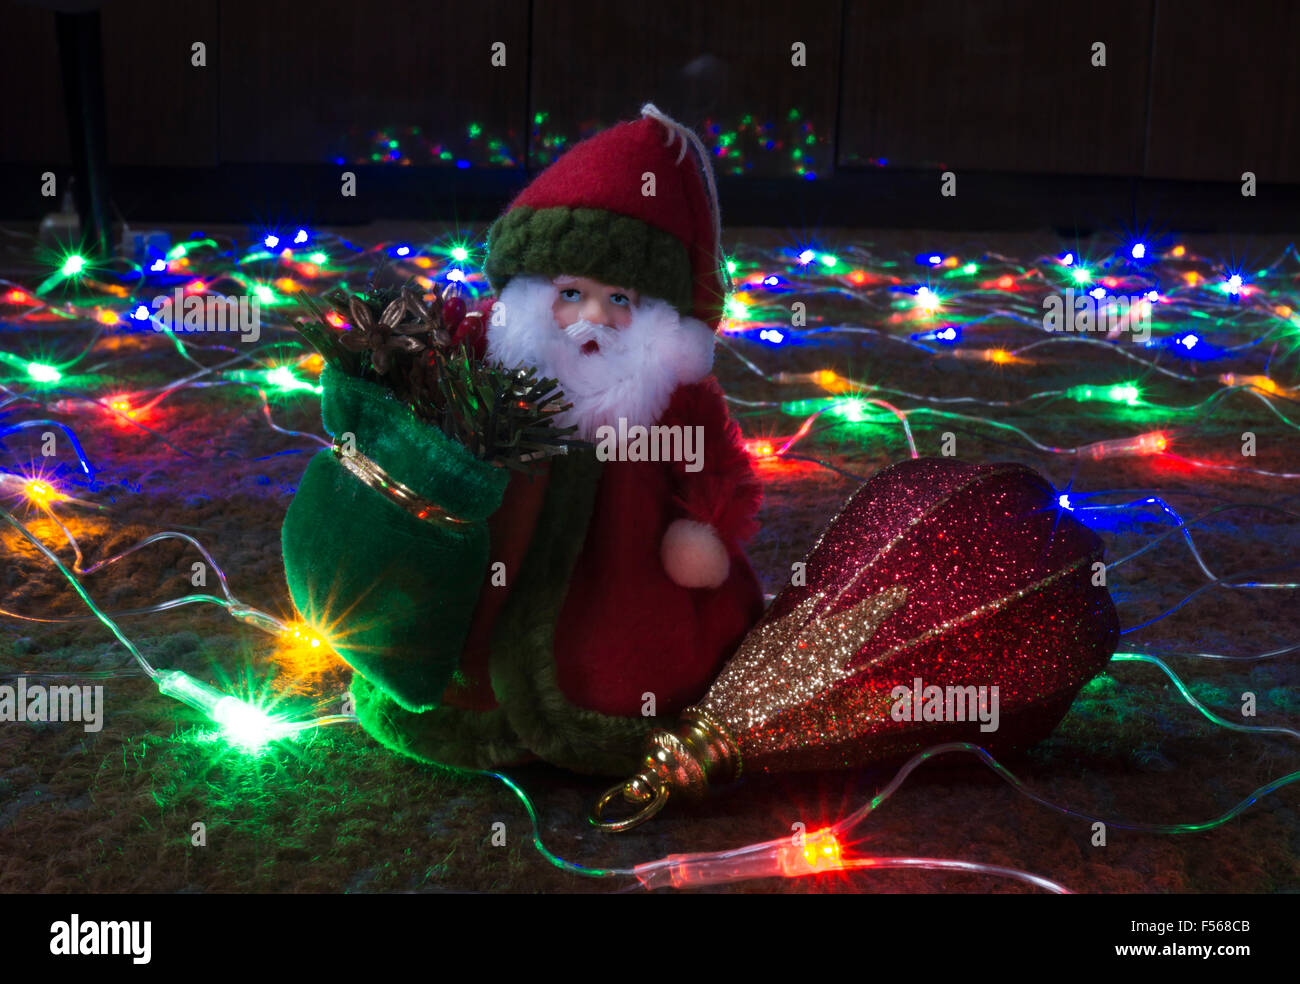 Grandparent Frost with toy on festoon of the colour lights on dark background Stock Photo